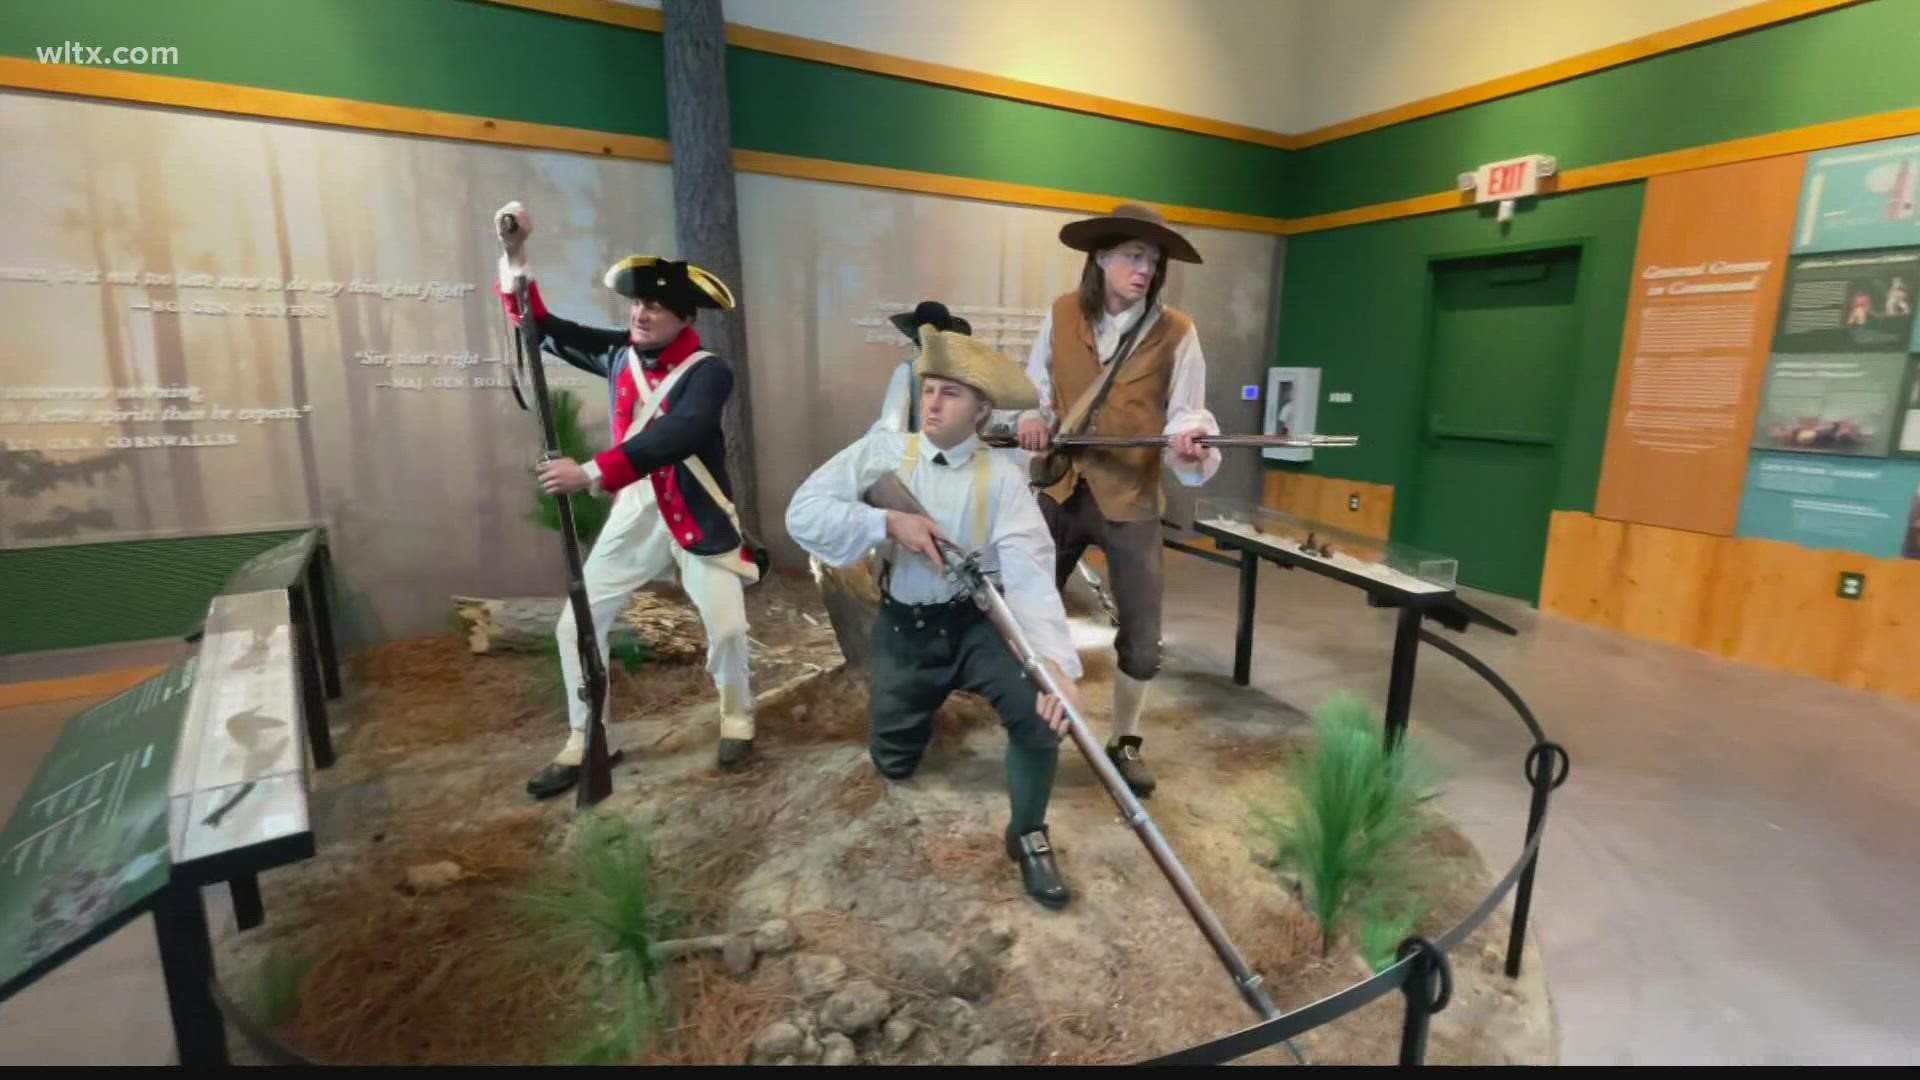 The new Revolutionary War Visitors Center in Camden will be opening this Friday.